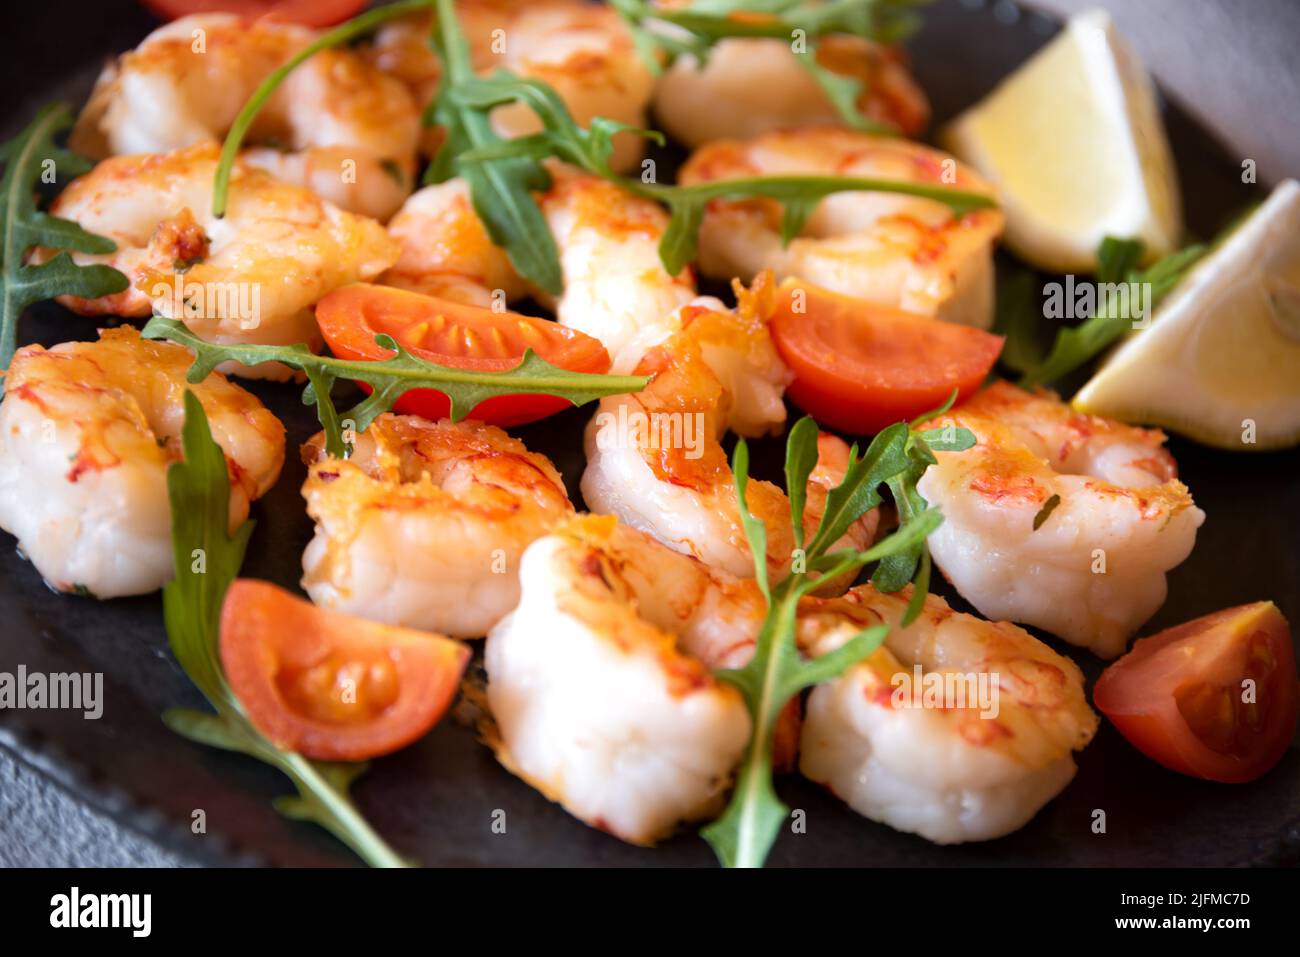 Roasted shrimps with tomatoes and arugola on black plate Stock Photo